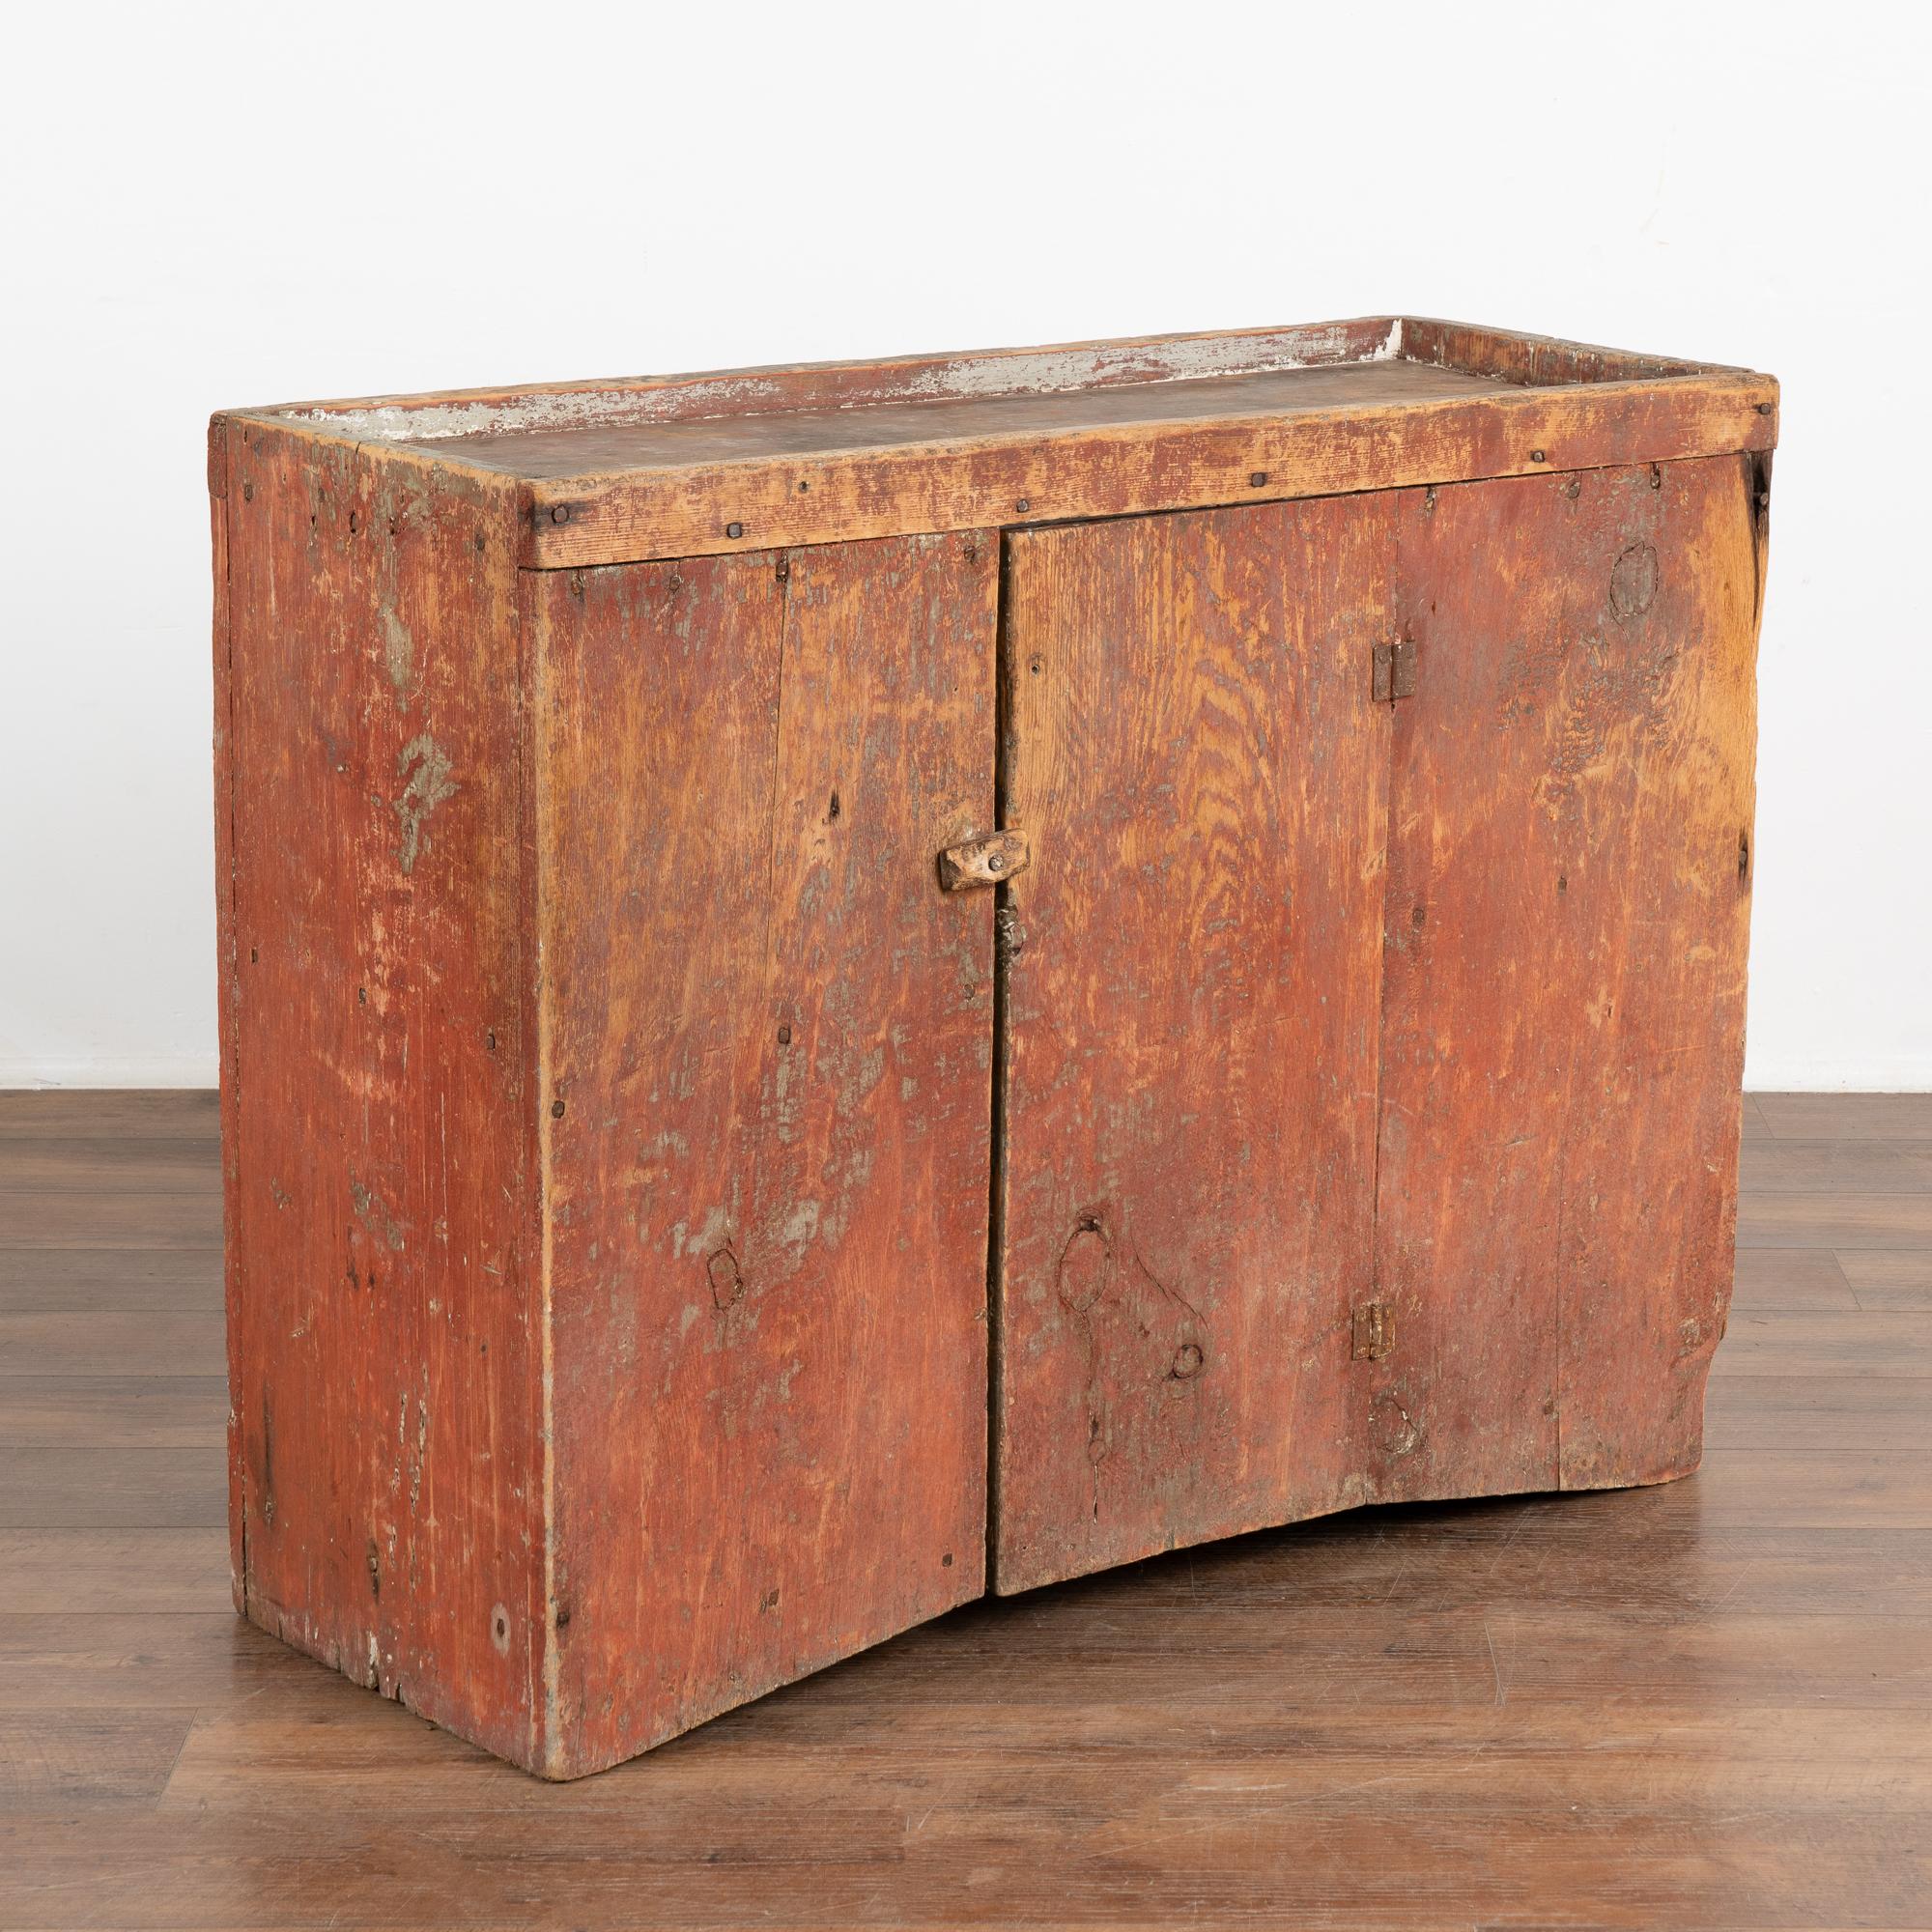 This rustic cabinet has great character thanks to the original red painted finish that was and still is a favorite color in Sweden.
Loaded with quirky charm, the base curves upward, center door closes with wooden peg, multiple cracks, distress, and